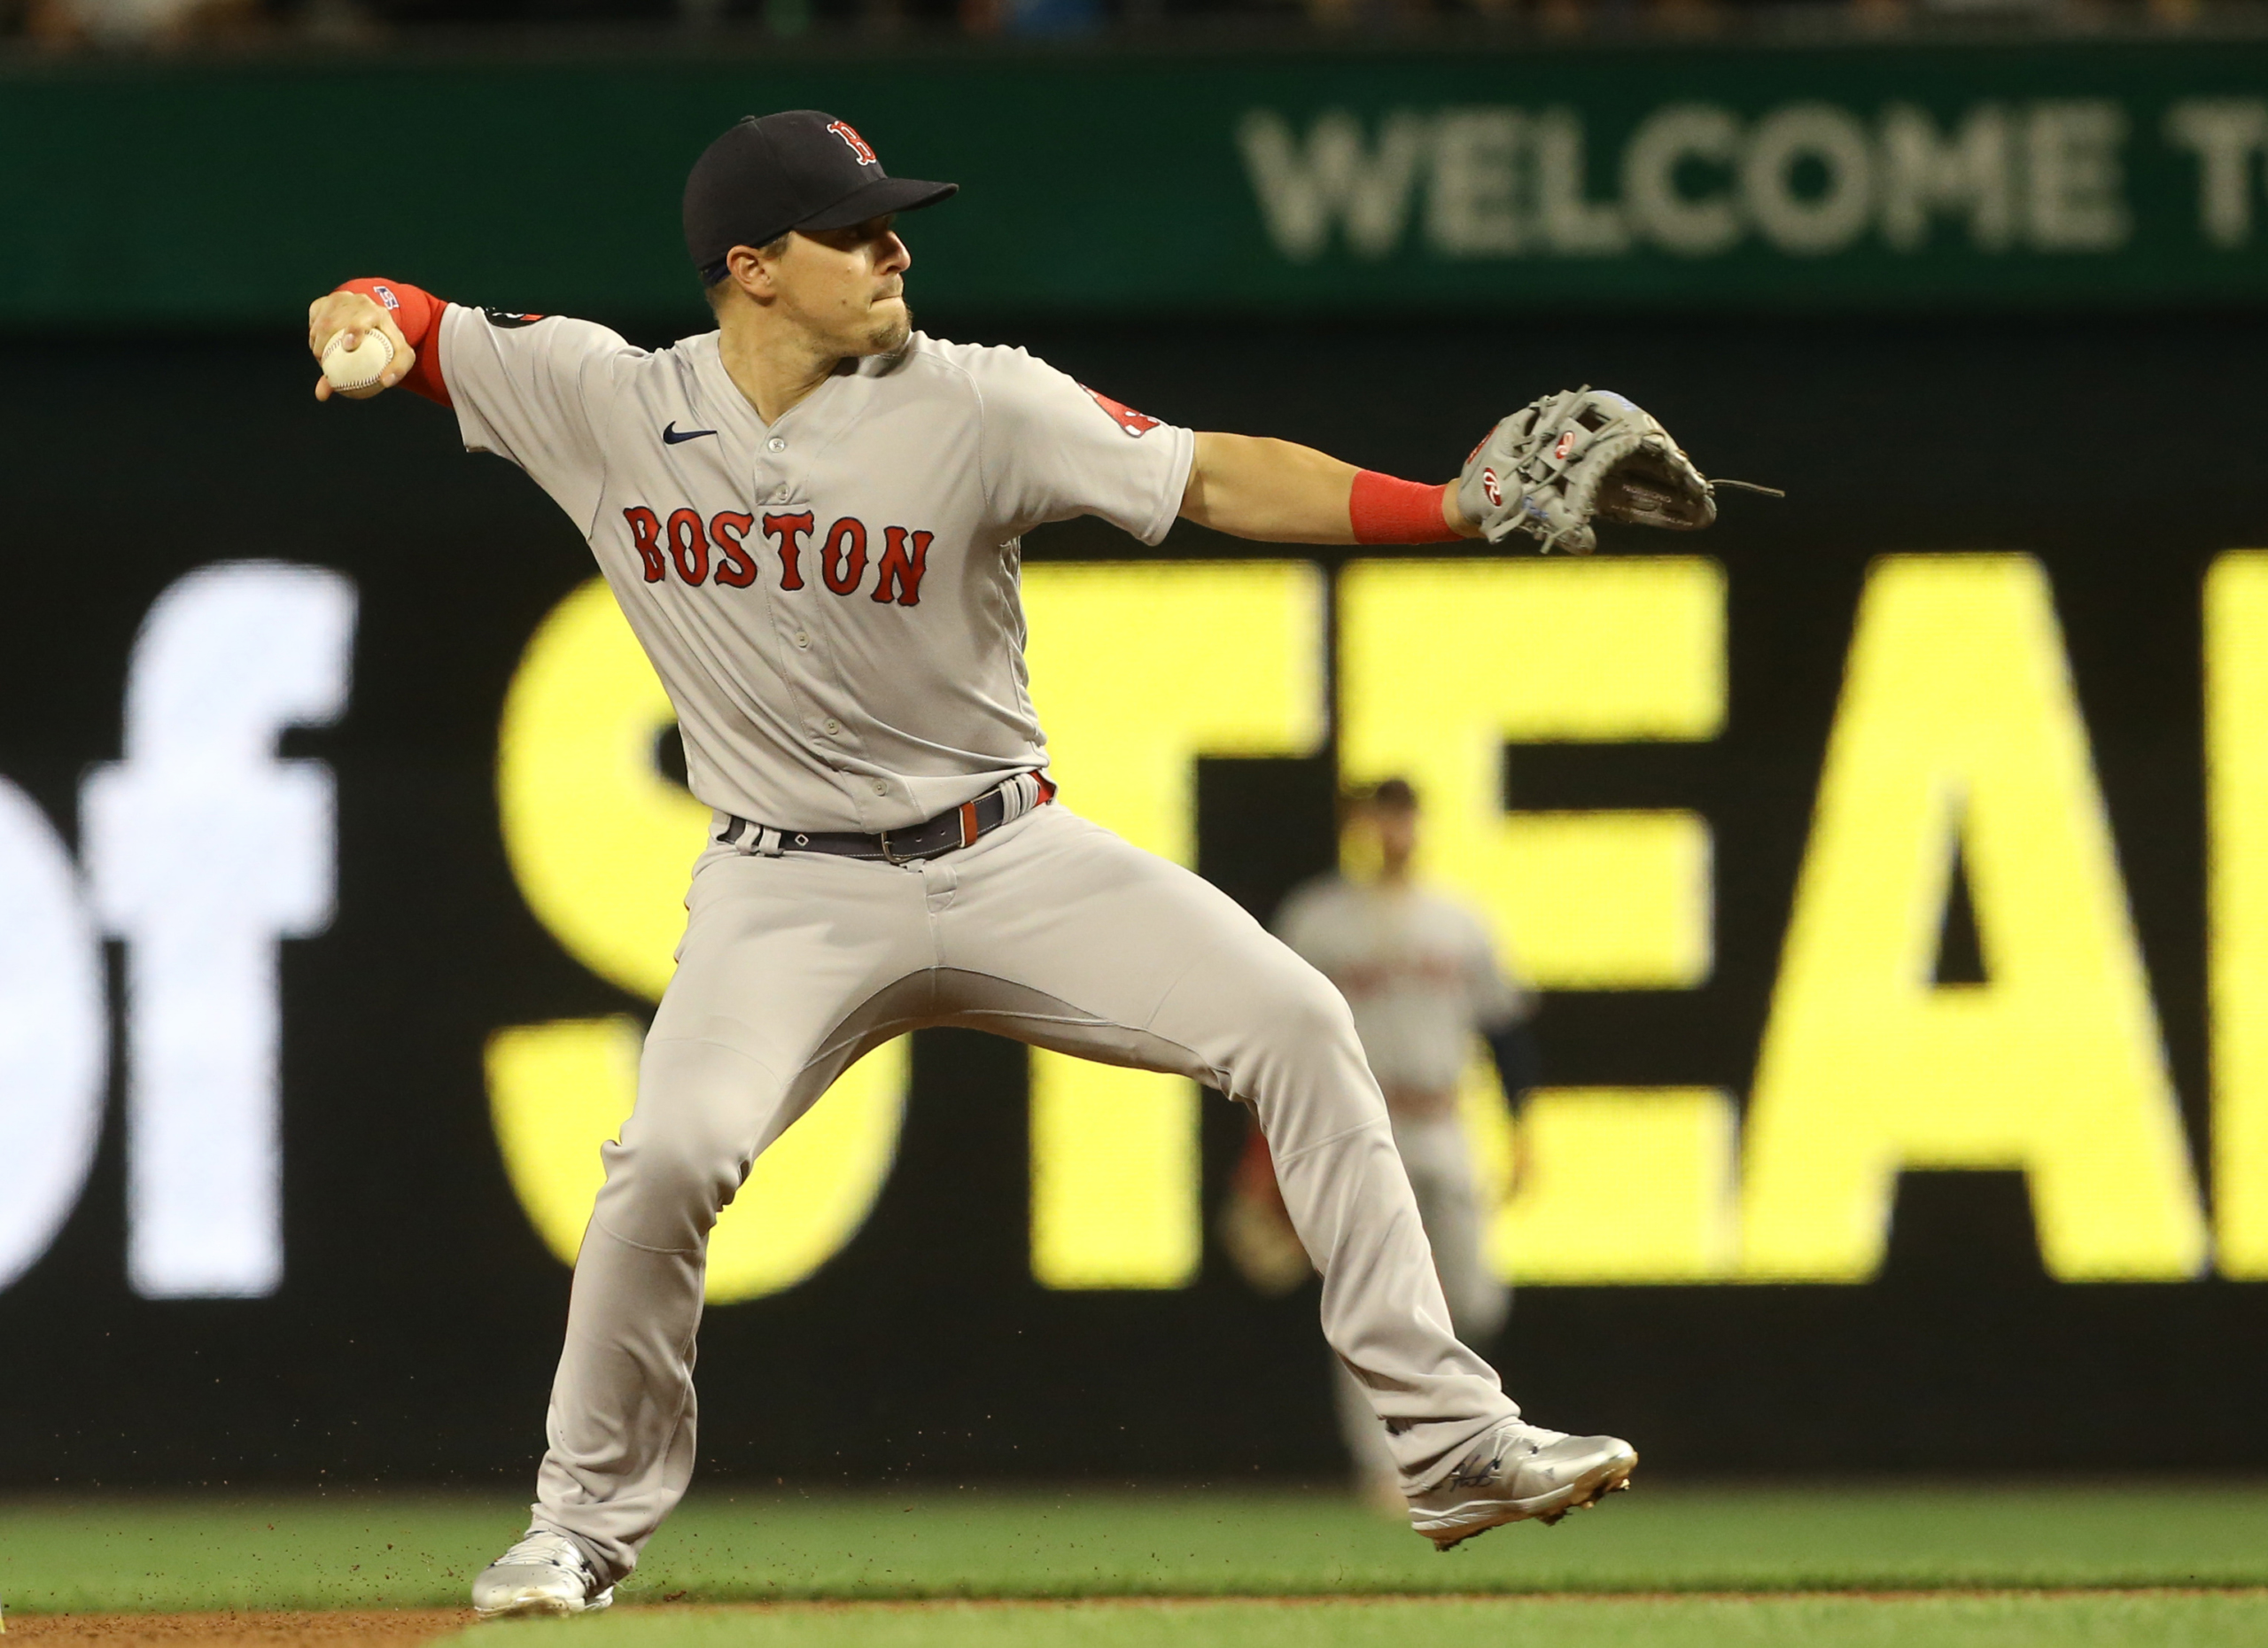 Red Sox Kike Hernandez is traded to Dodgers for pair of pitchers